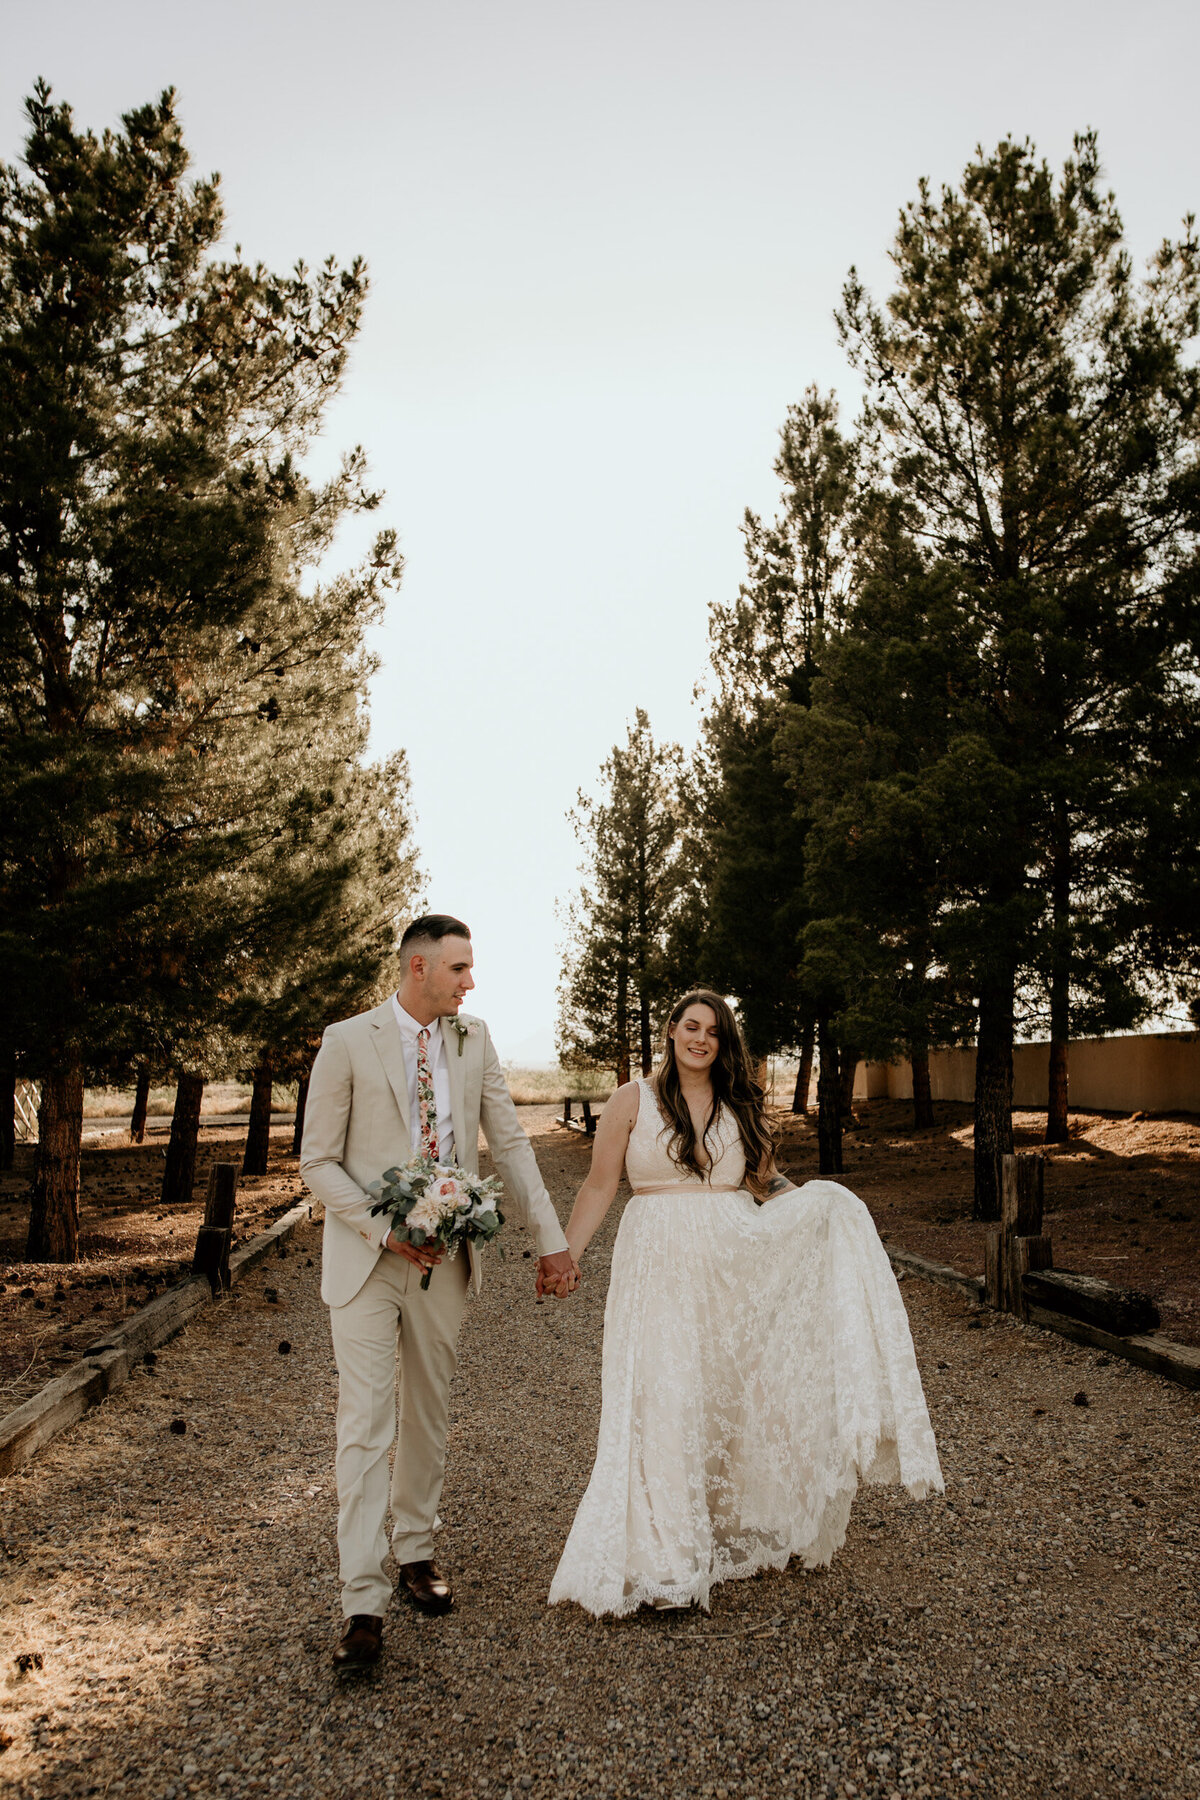 newlyweds walking together through trees in the desert